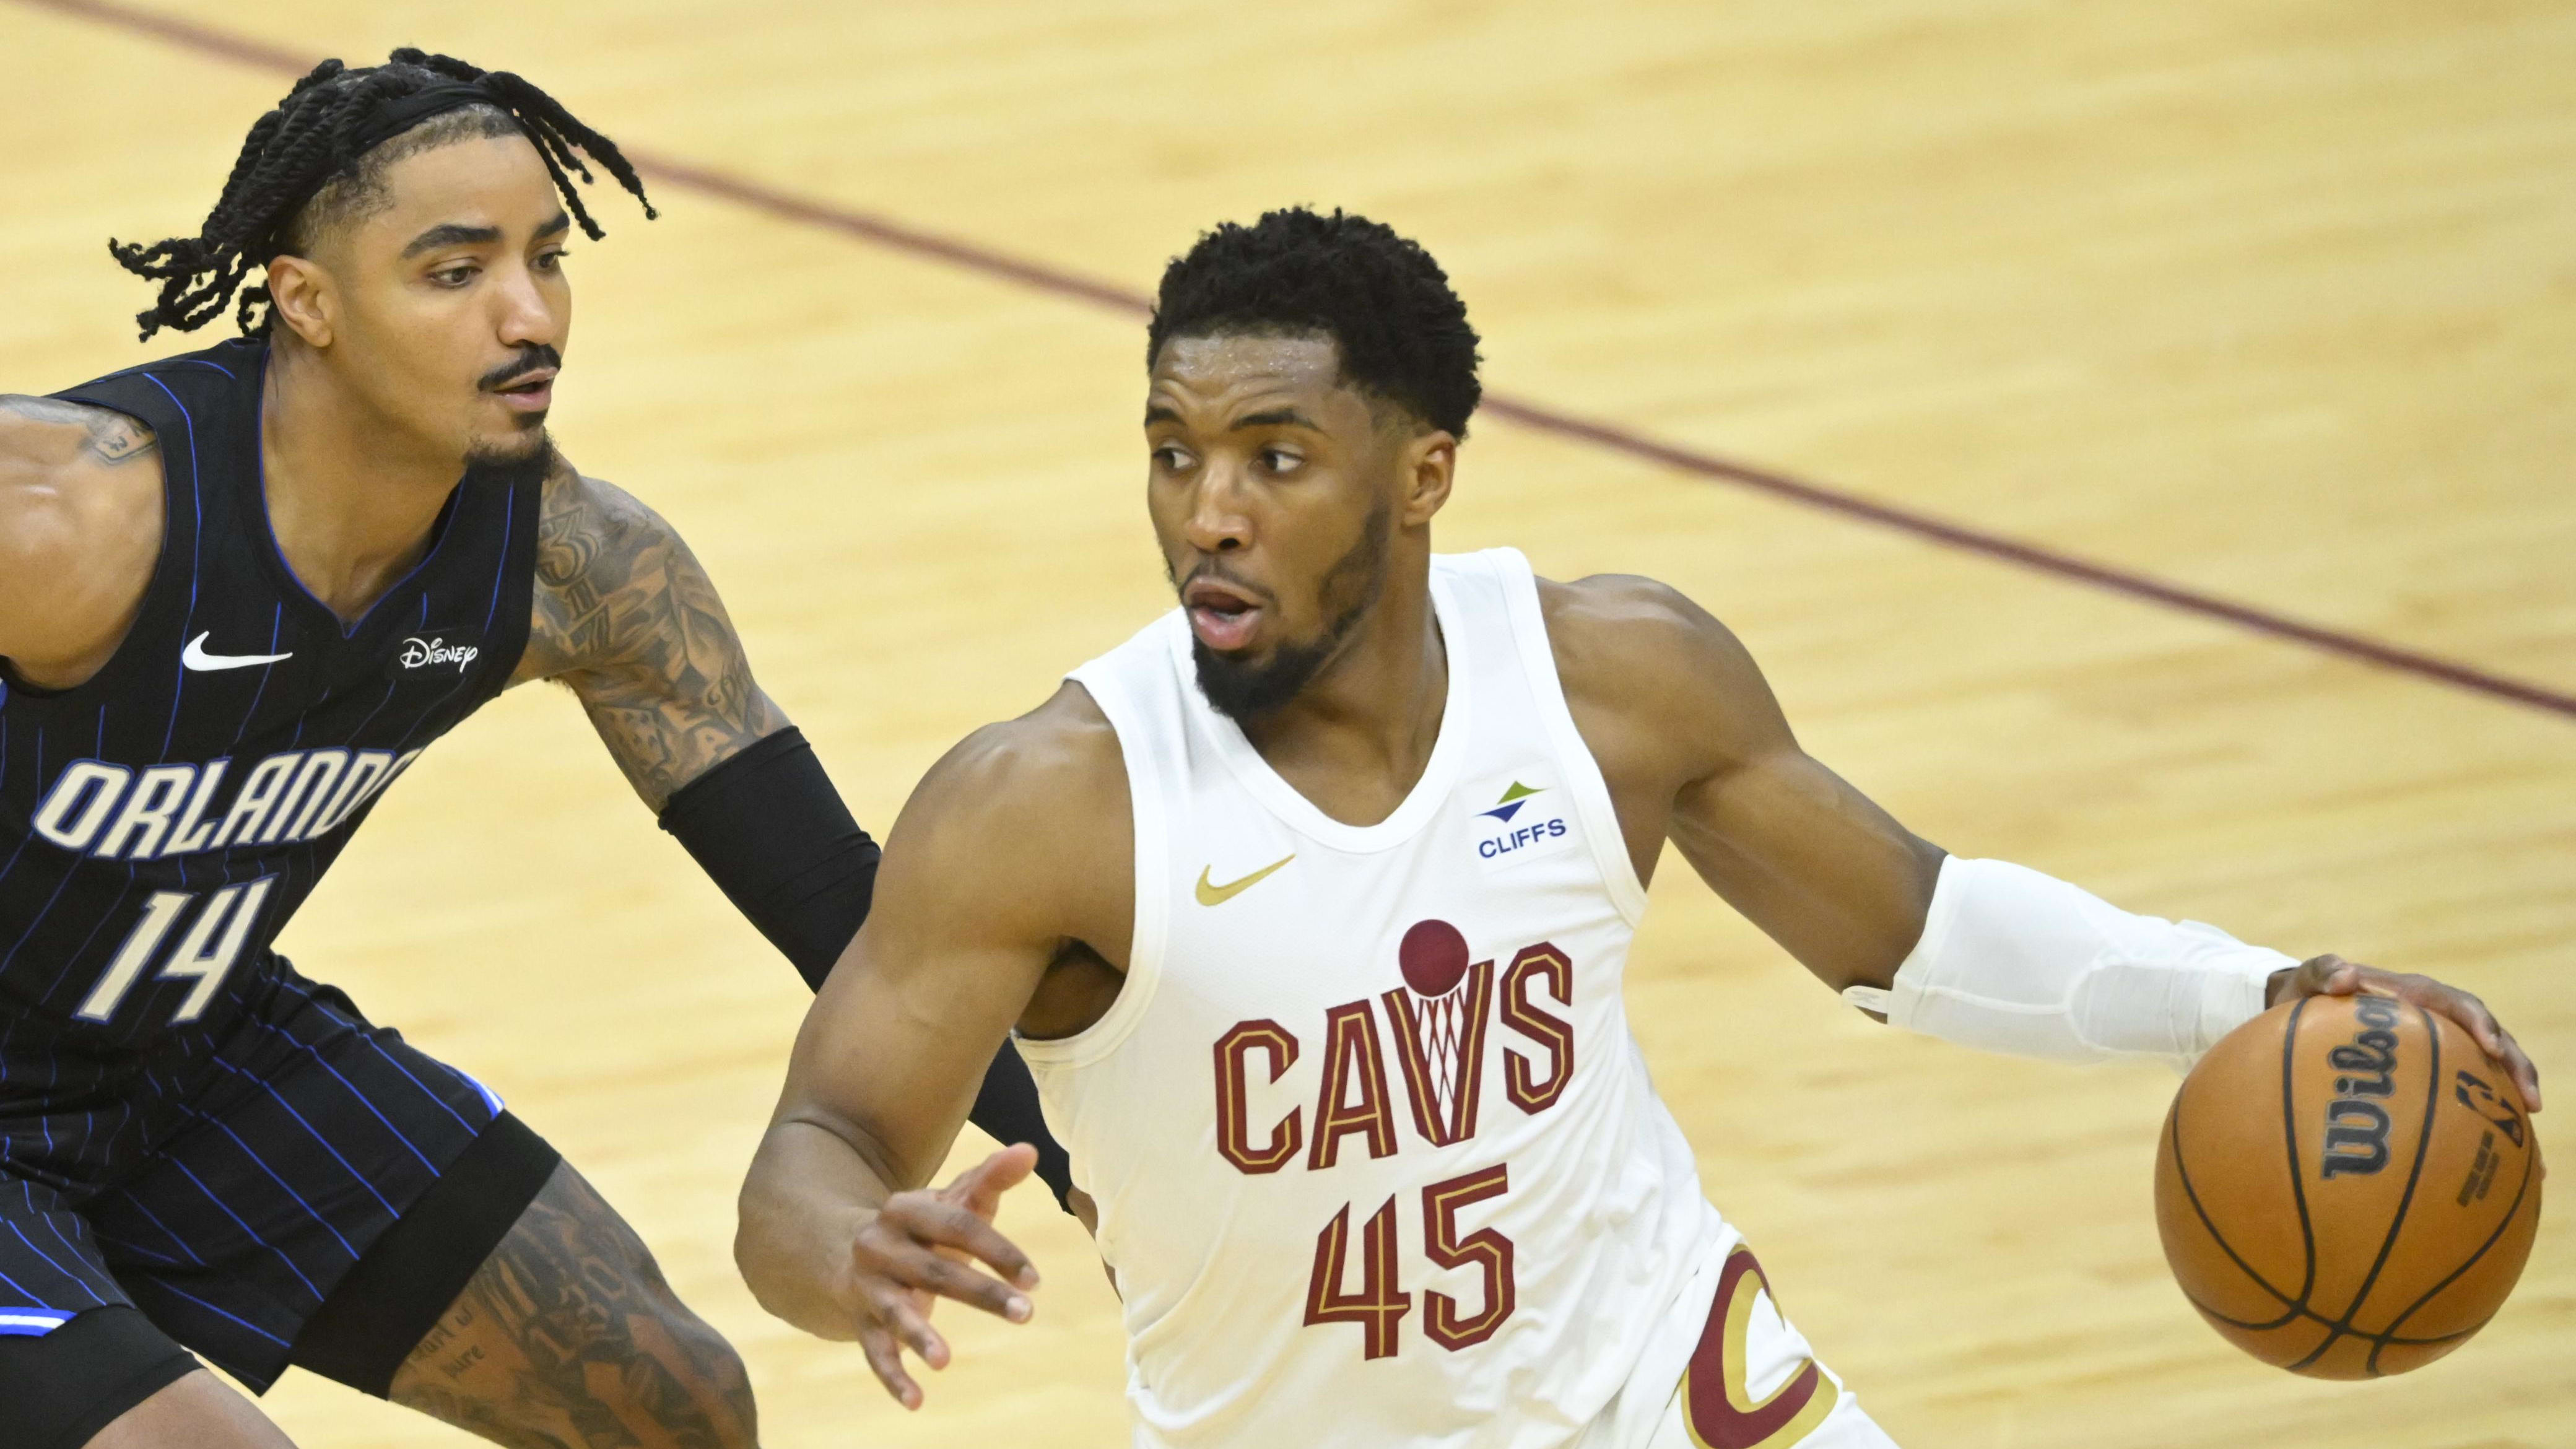 Mitchell Shines with 30 Points, Powers Cavs to Playoff Win Over Magic